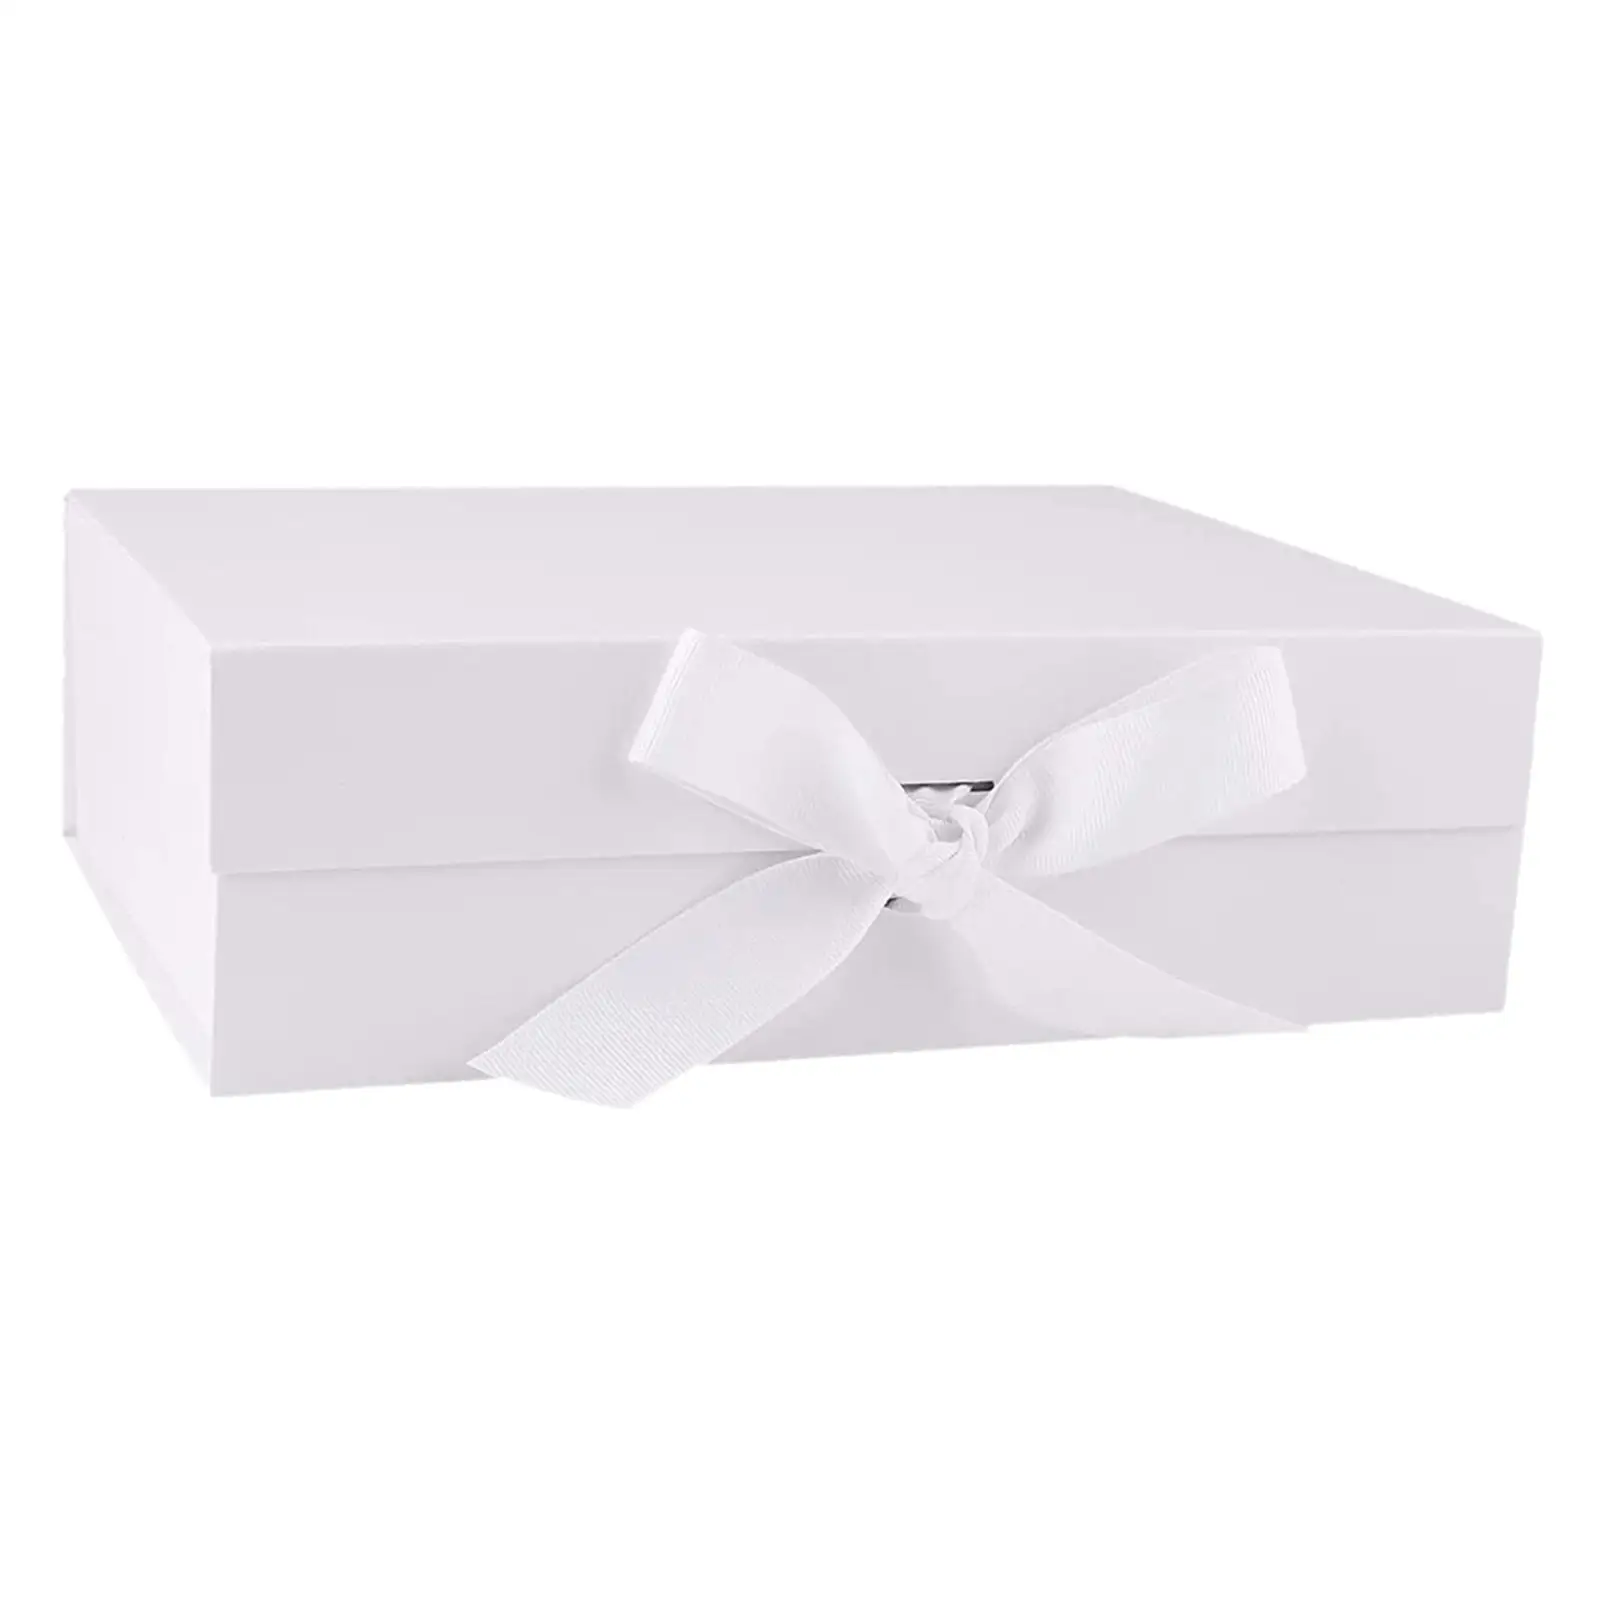 Gift Box with Ribbon Easy Assemble Reusable Large Storage Box for Wedding Keepsake Bridemaid Gifts Birthday Party Cupcake Boxes